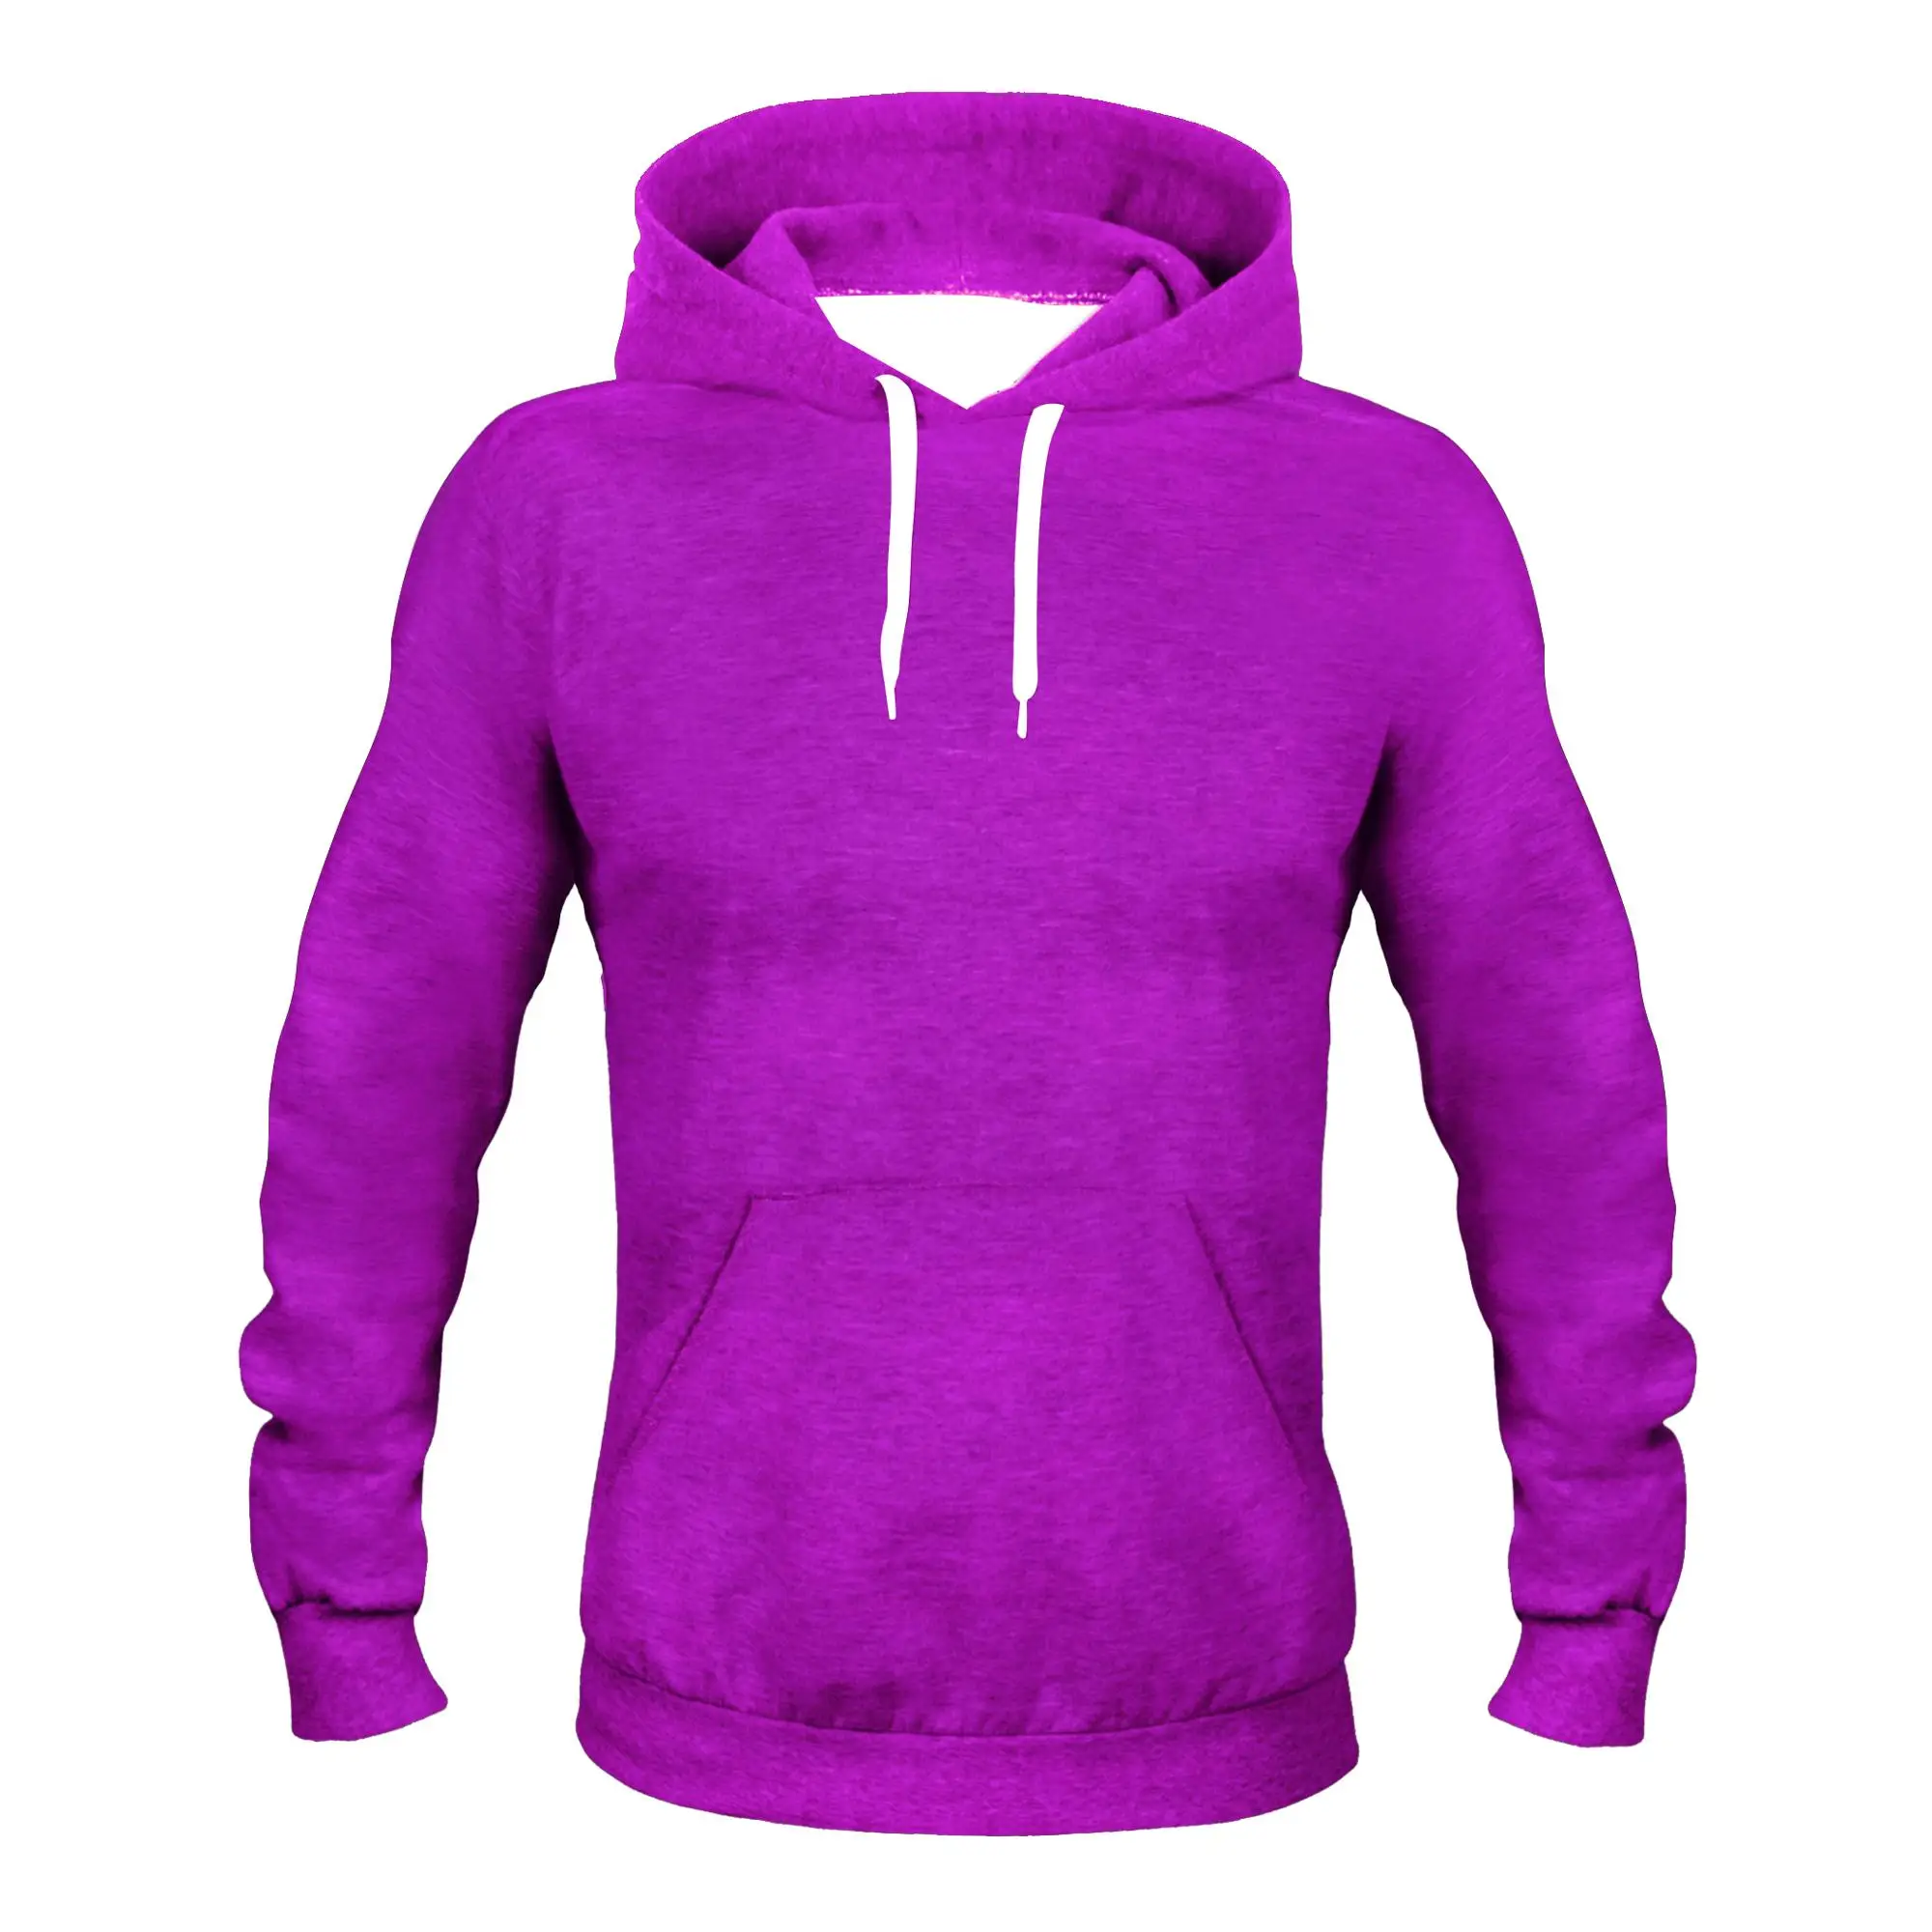 Plain Fitted Hoodie,Wholesale Lightweight Hoodie,Mens Fashion Hoodie - Buy Plain Fitted Hoodie ...